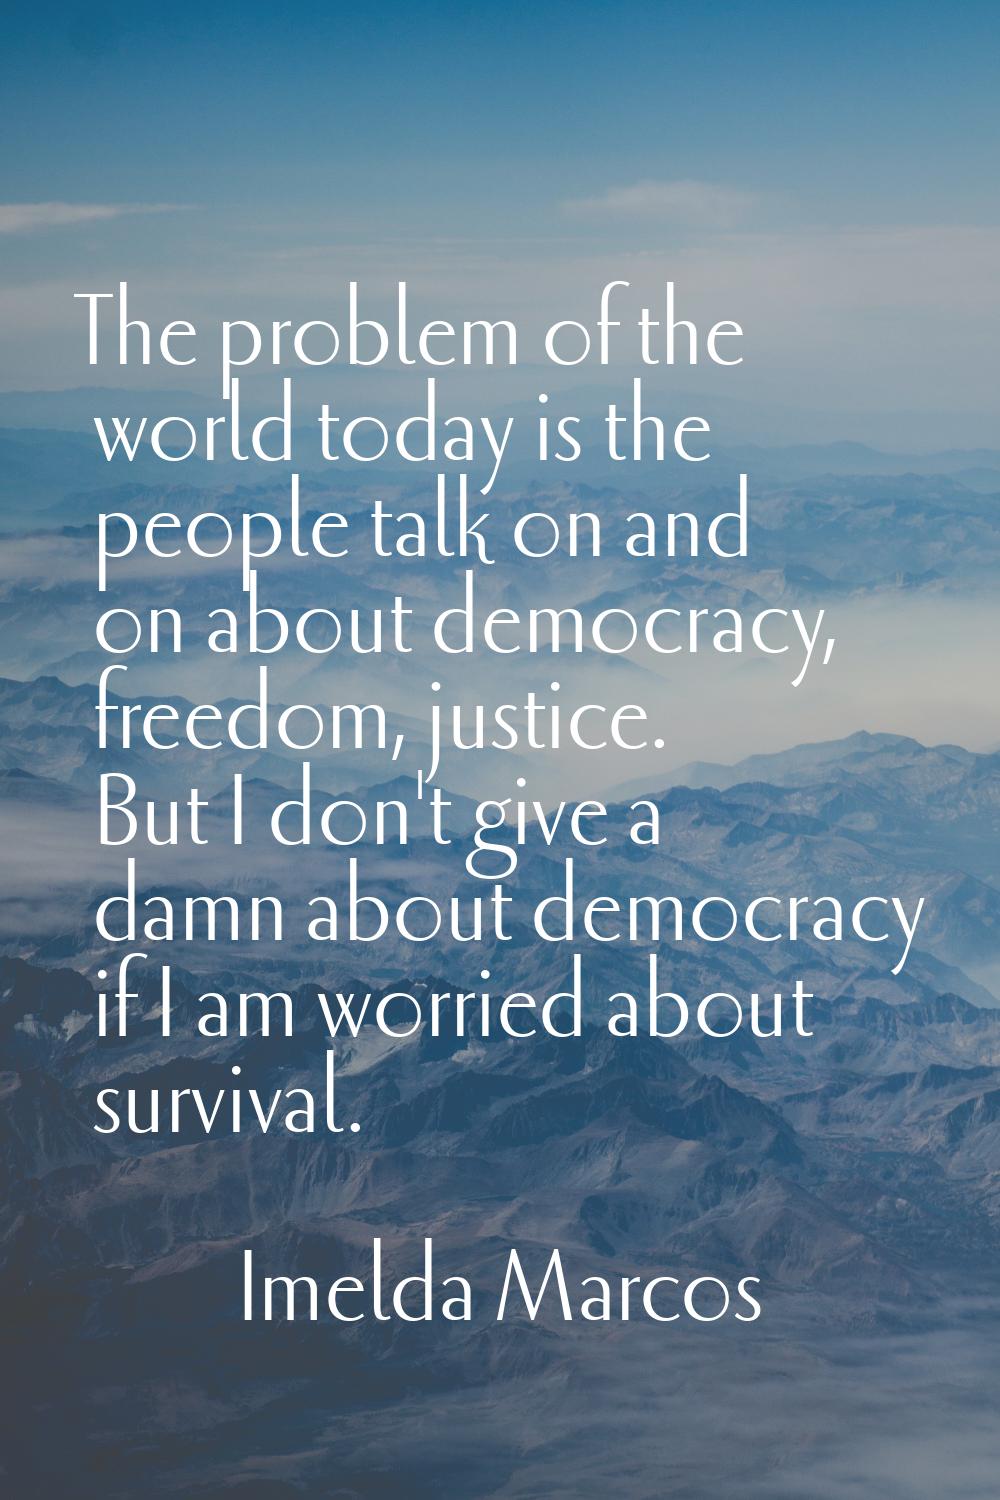 The problem of the world today is the people talk on and on about democracy, freedom, justice. But 